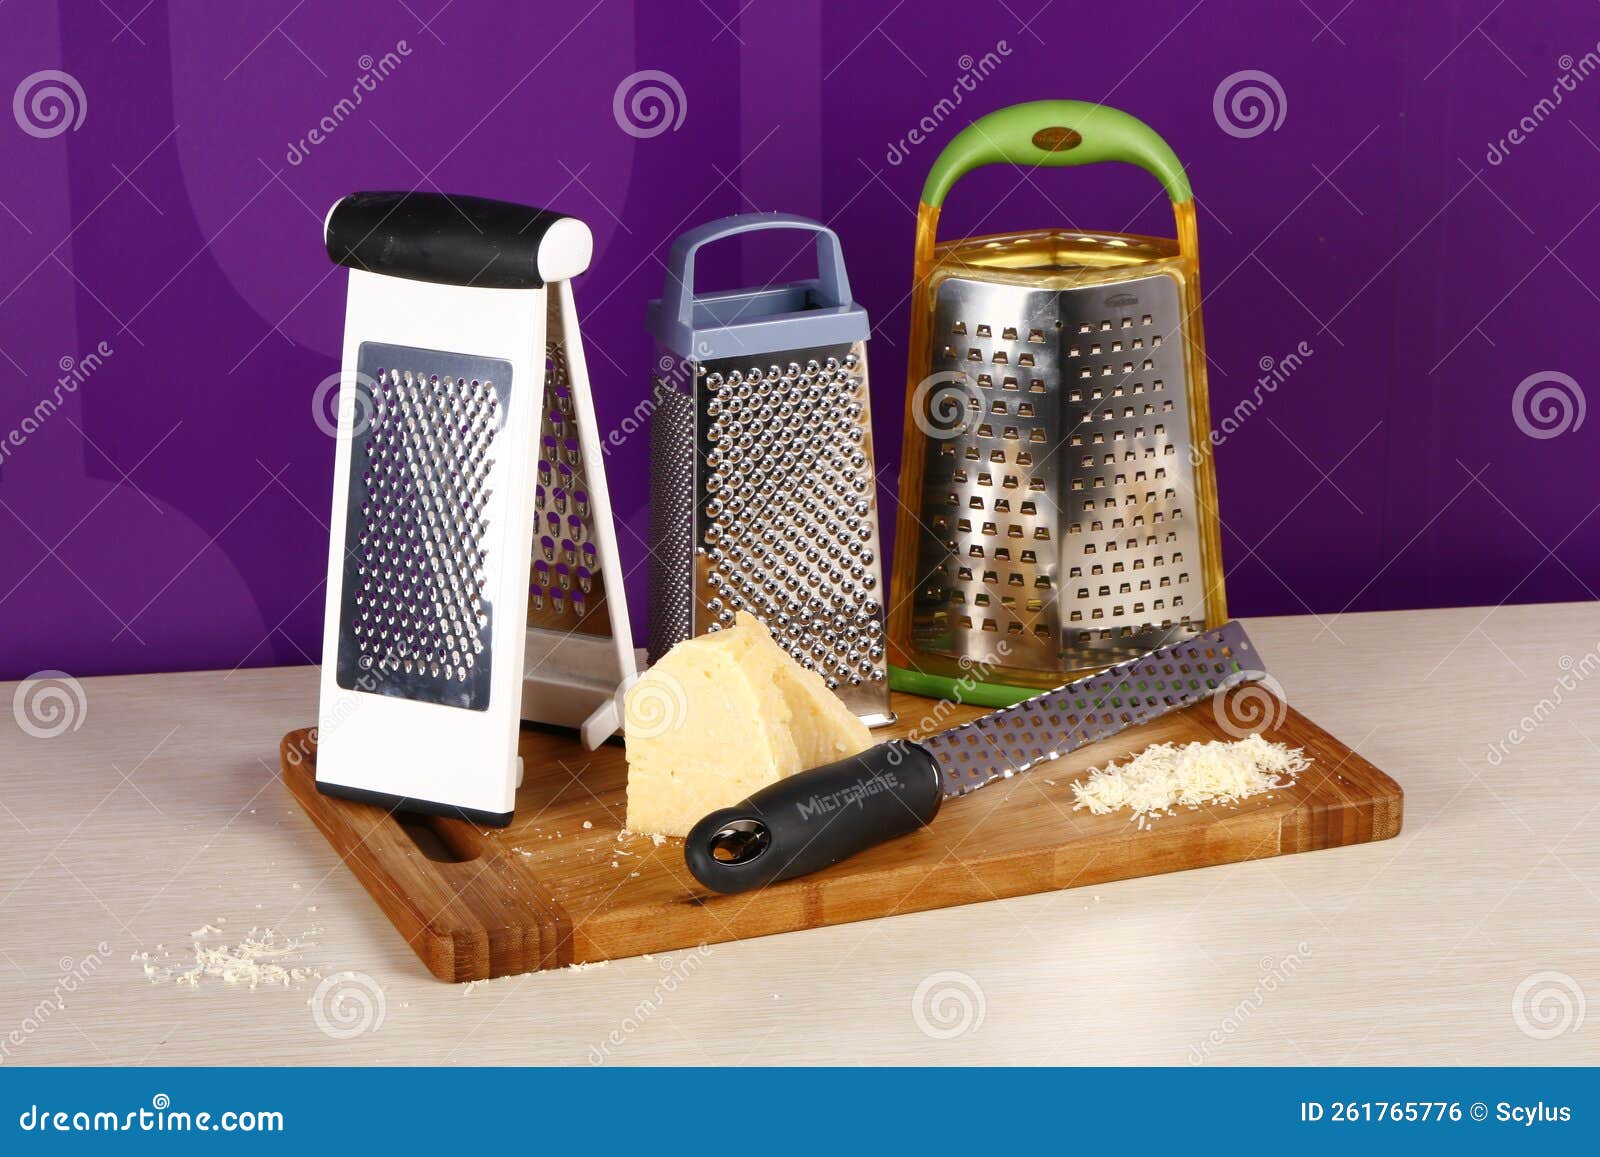 5+ Thousand Cheese Grater Stainless Steel Royalty-Free Images